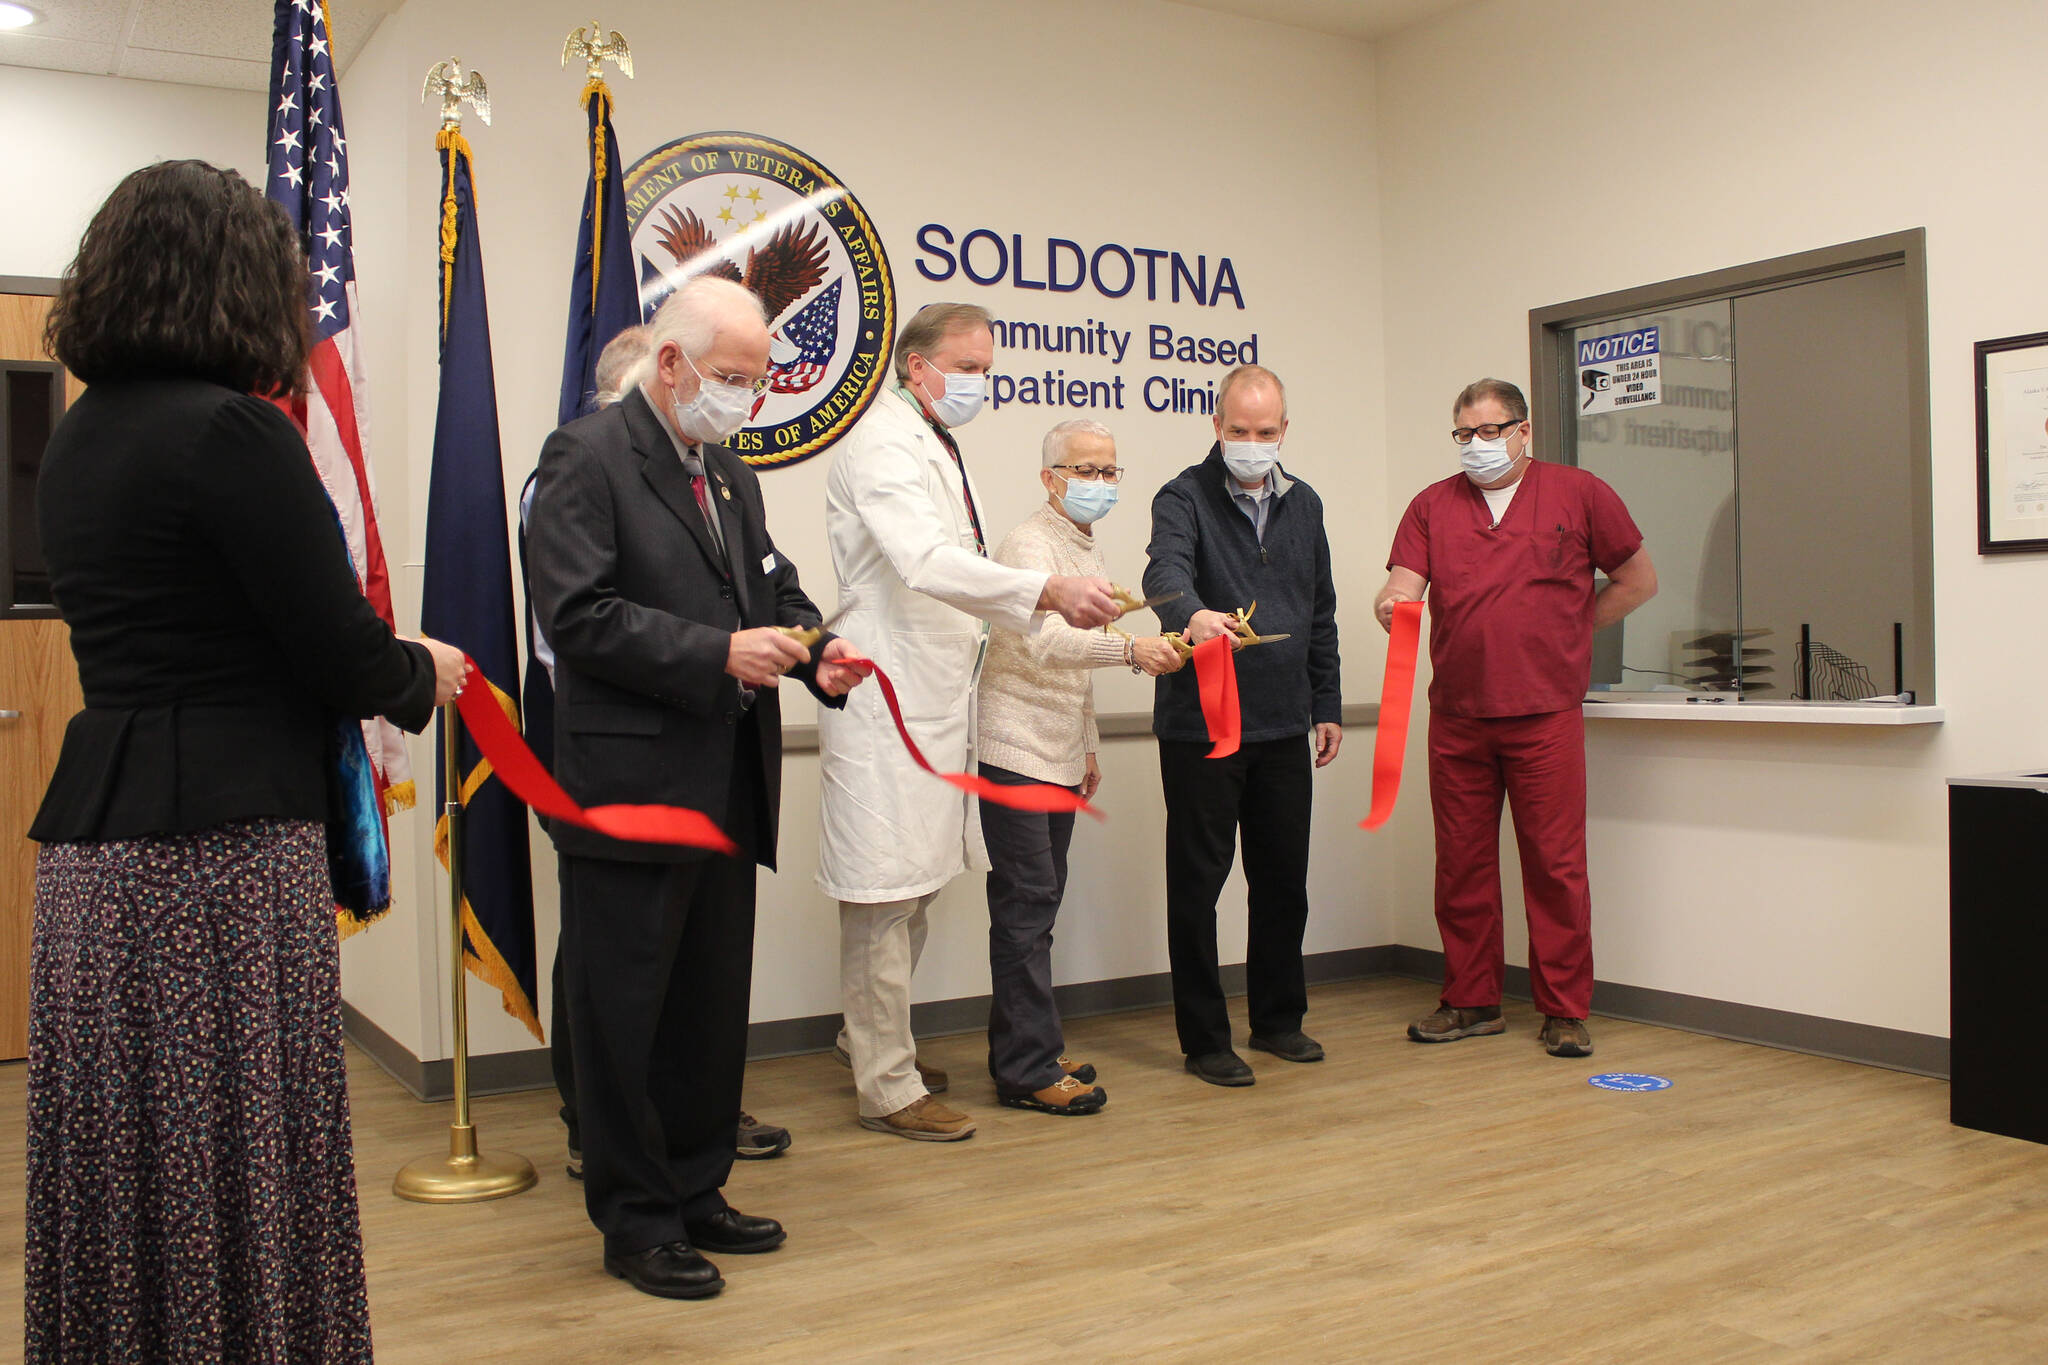 Stakeholders cut a ribbon at the Soldotna Community Based Outpatient Clinic on Thursday, Dec. 29, 2021 in Soldotna, Alaska. (Ashlyn O’Hara/Peninsula Clarion)